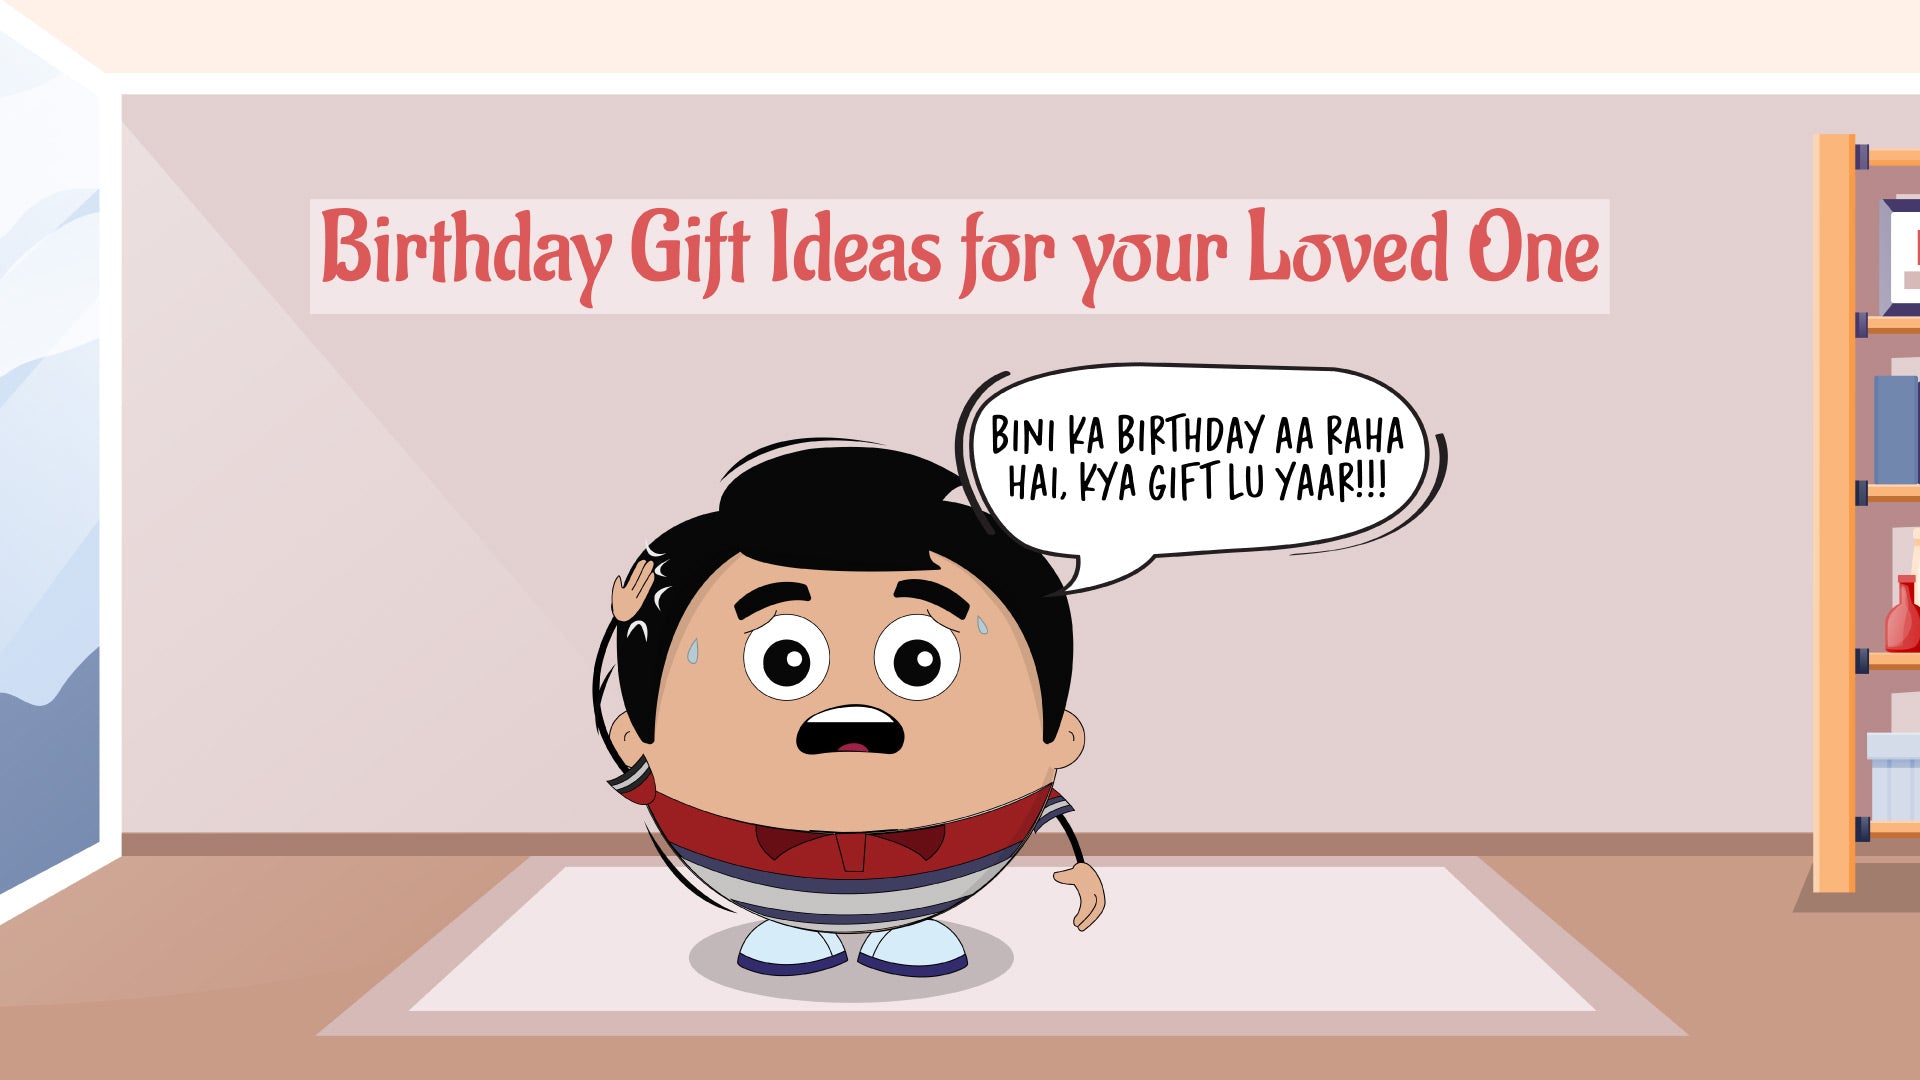 Quirky Birthday Gifts for the Loved Ones